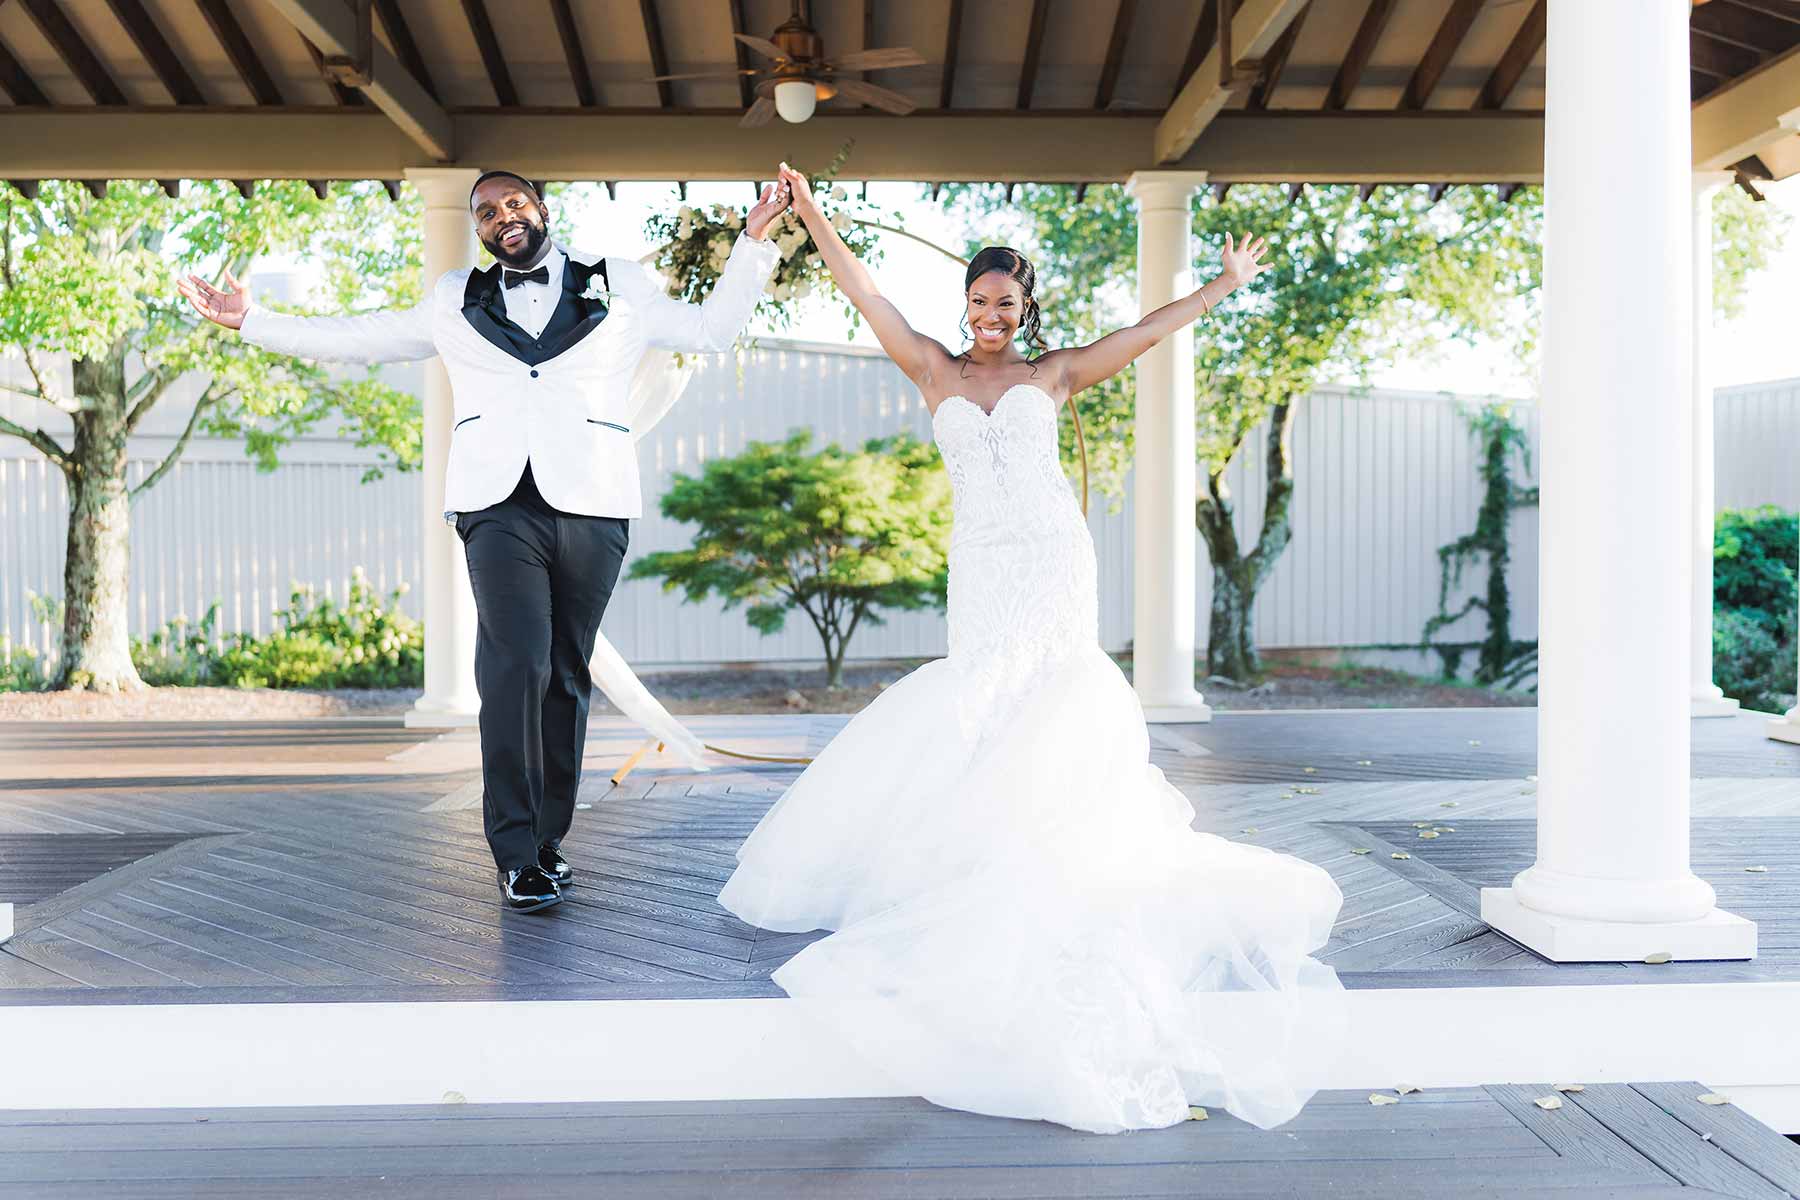 55 Wedding Entrance Songs That Will Wow Your Guests Joy